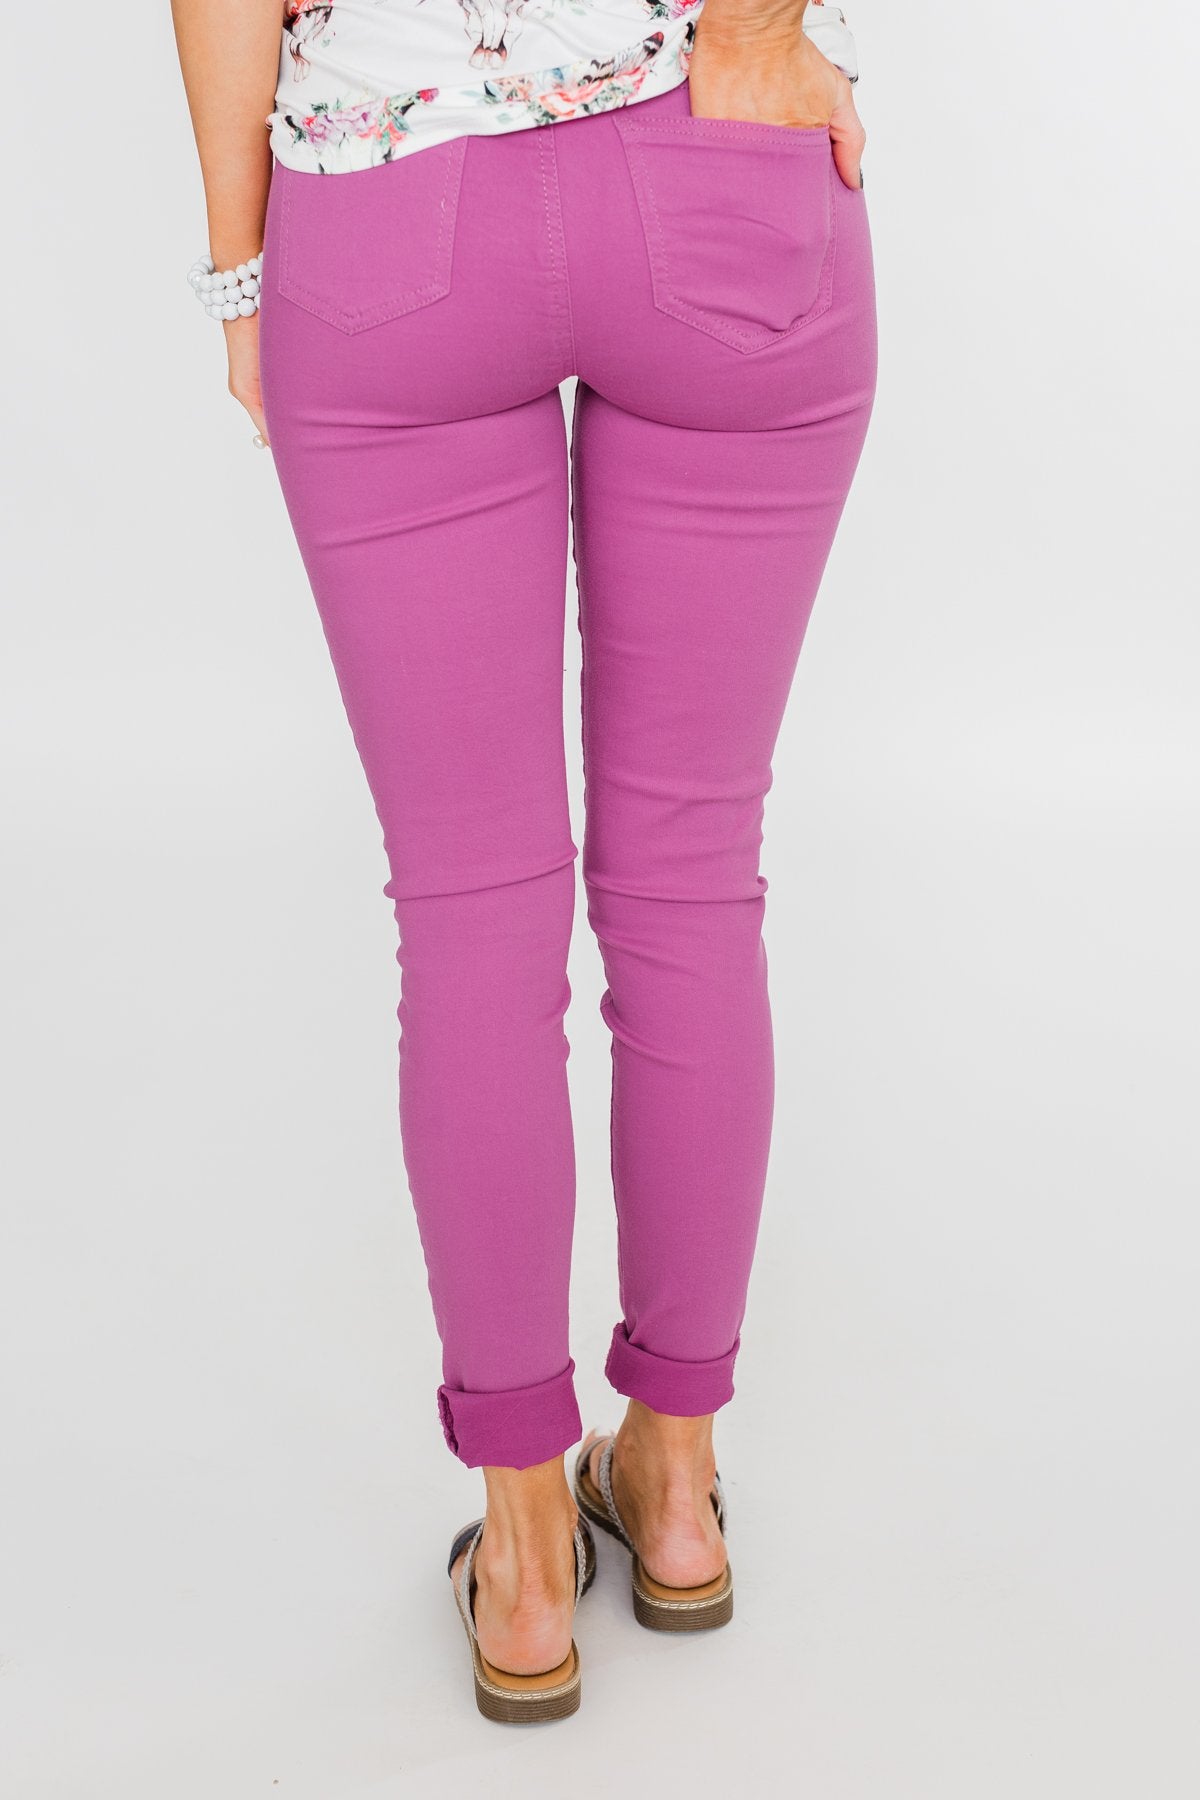 Celebrity Pink Skinny Jeans- Orchid